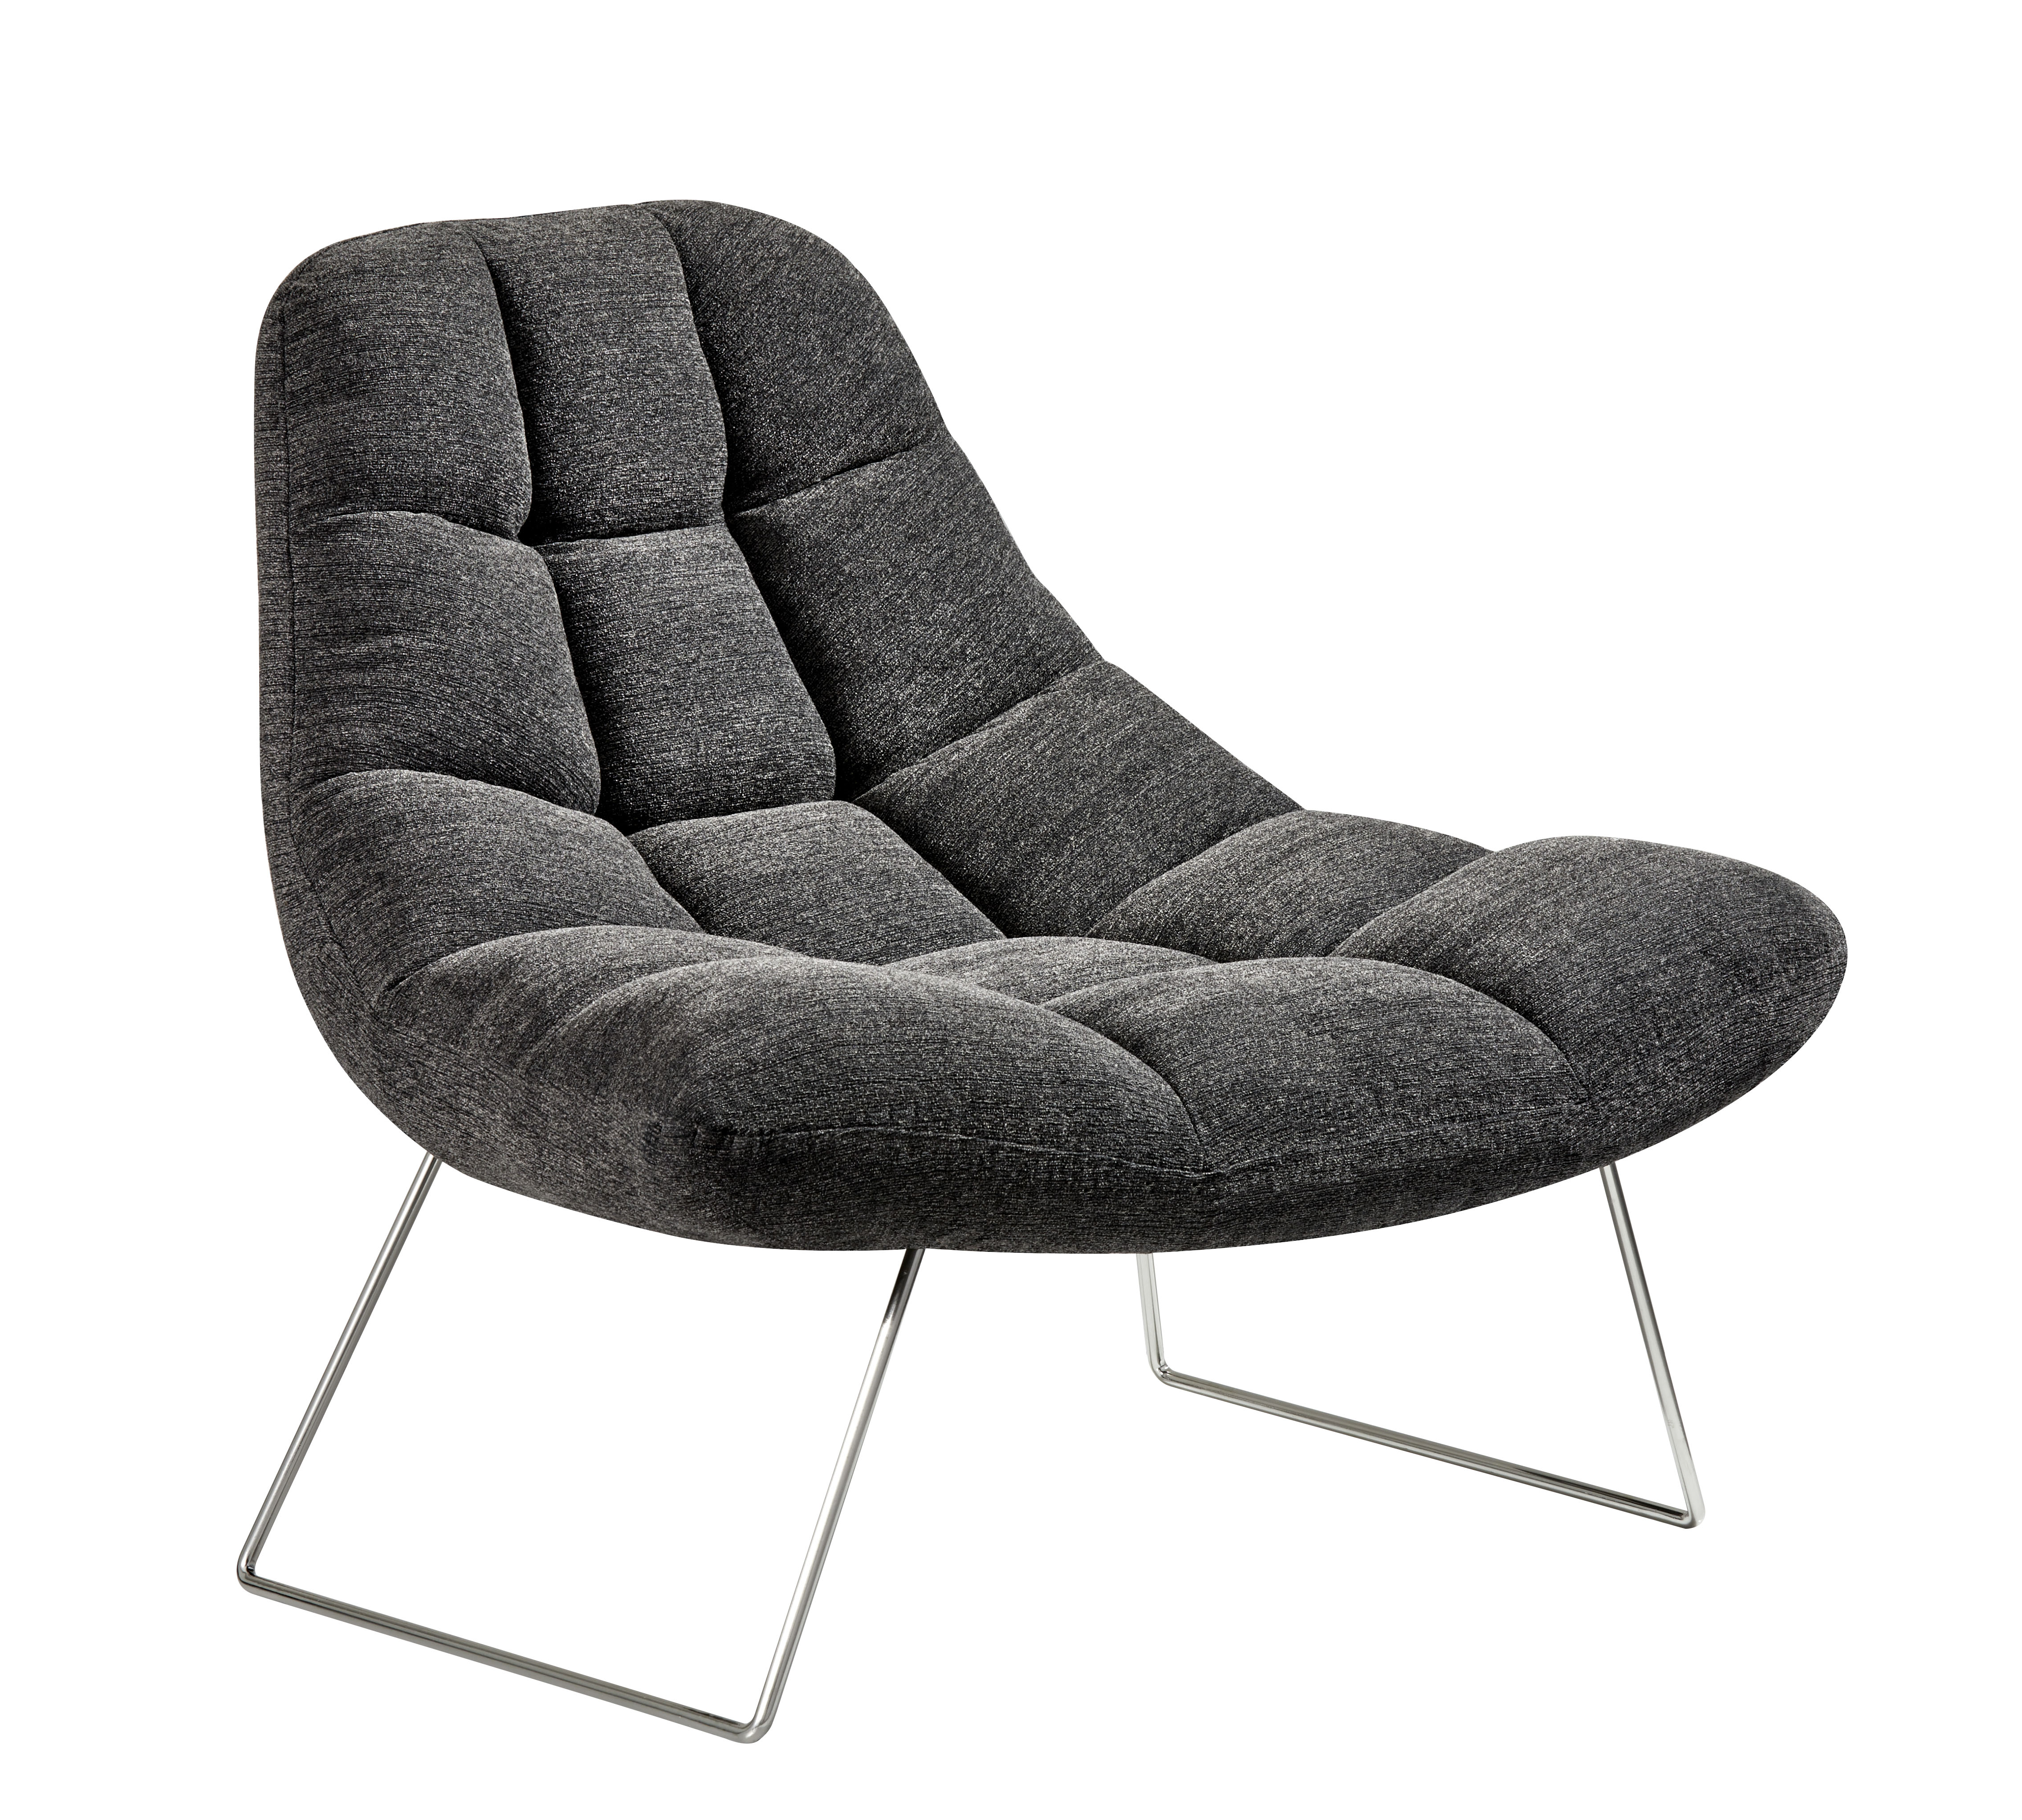 textured charcoal lounging chair